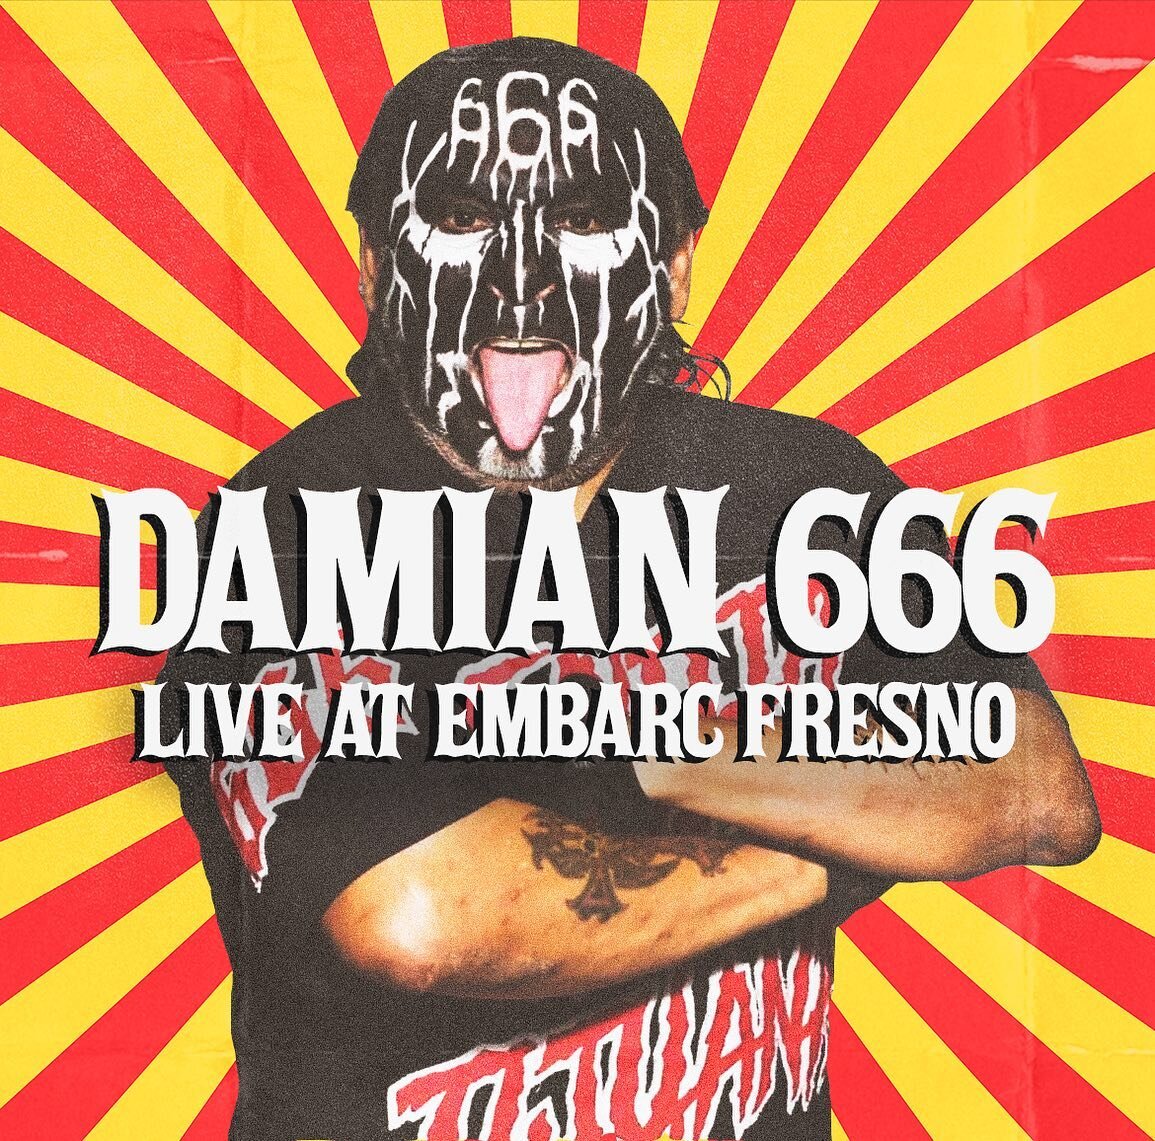 OH SHIIIIIIIIT! EL MAS CHINGON - THE LEGENDARY - DAMIAN 666 👹 IS MAKING A VERY SPECIAL APPEARANCE AT EMBARC FRESNO THIS FRIDAY FOR #CINCODEMAYO!

THE BADDEST VATO IN TJ IS A LUCHADOR FAVORITE. HE&rsquo;S PERFORMED WITH US MANY TIMES AND LEAVES IN HI